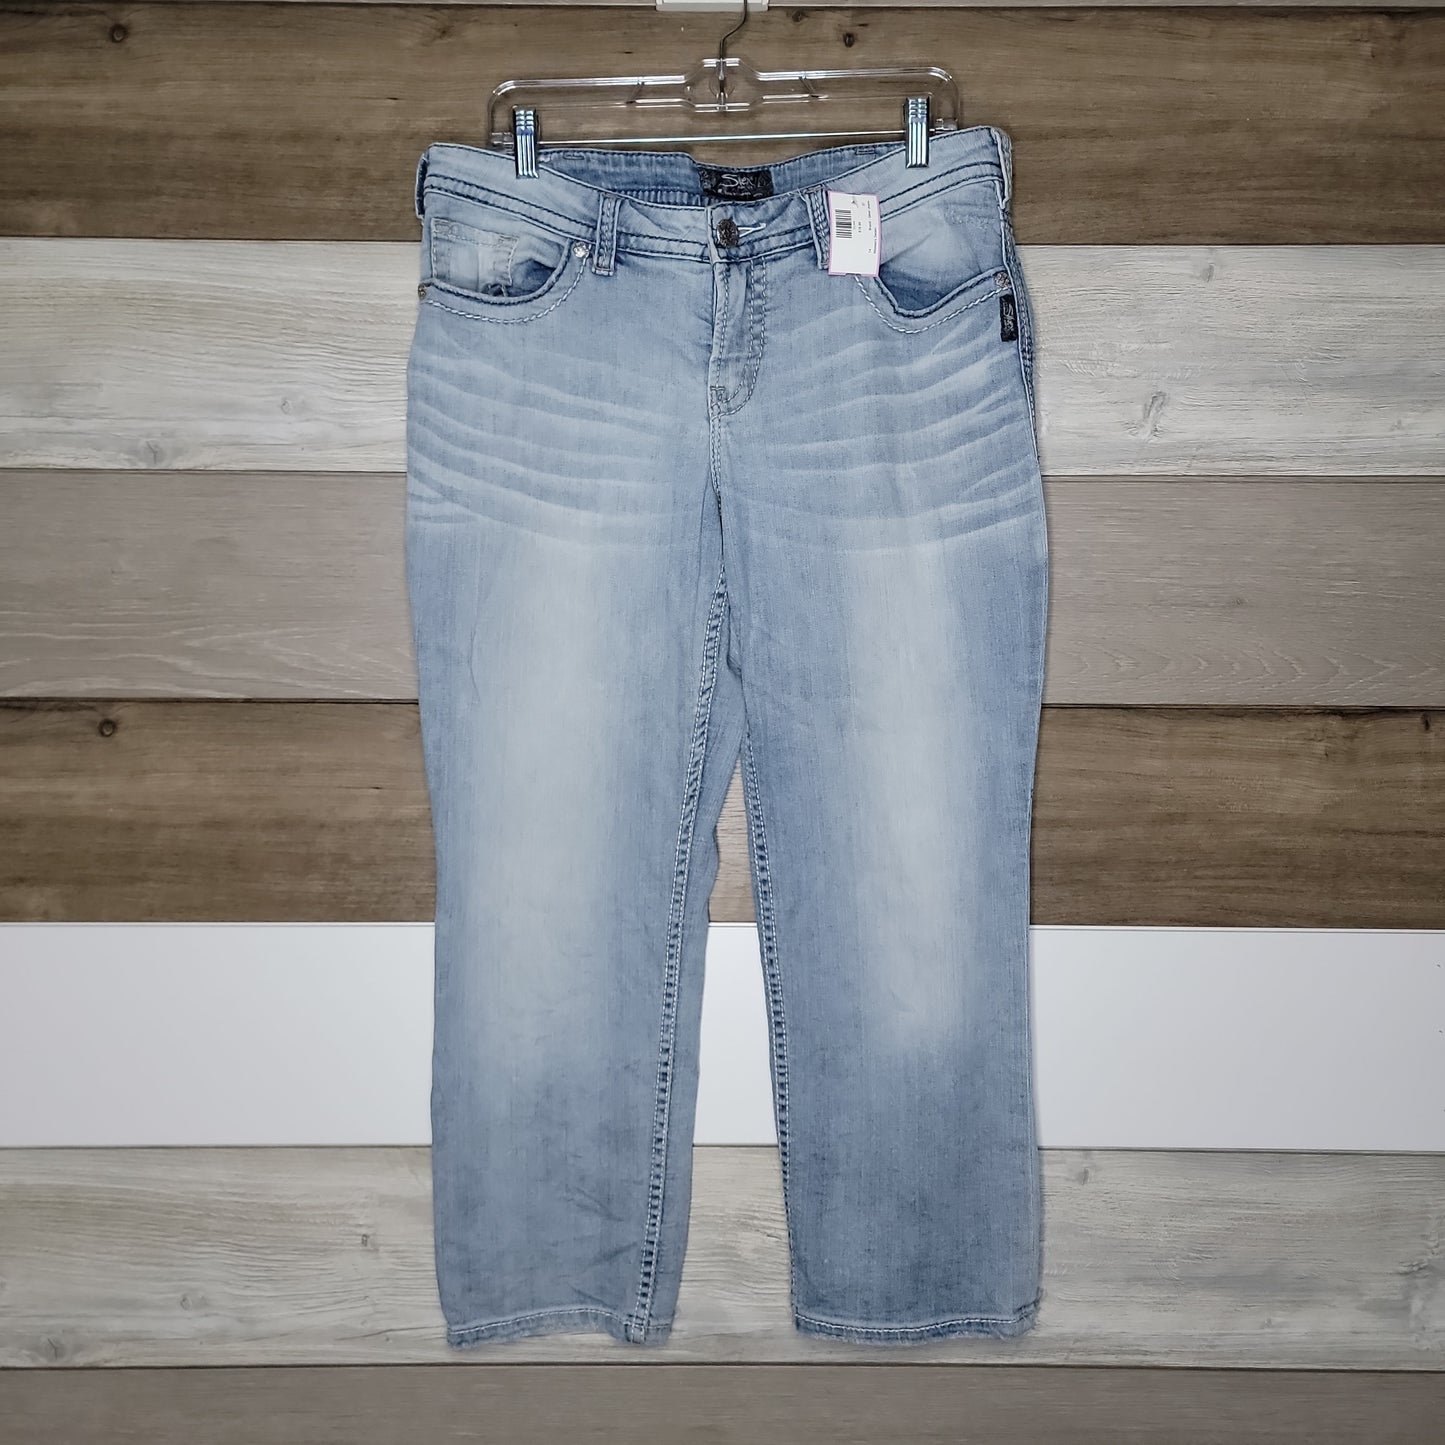 Brand - Silver Jeans